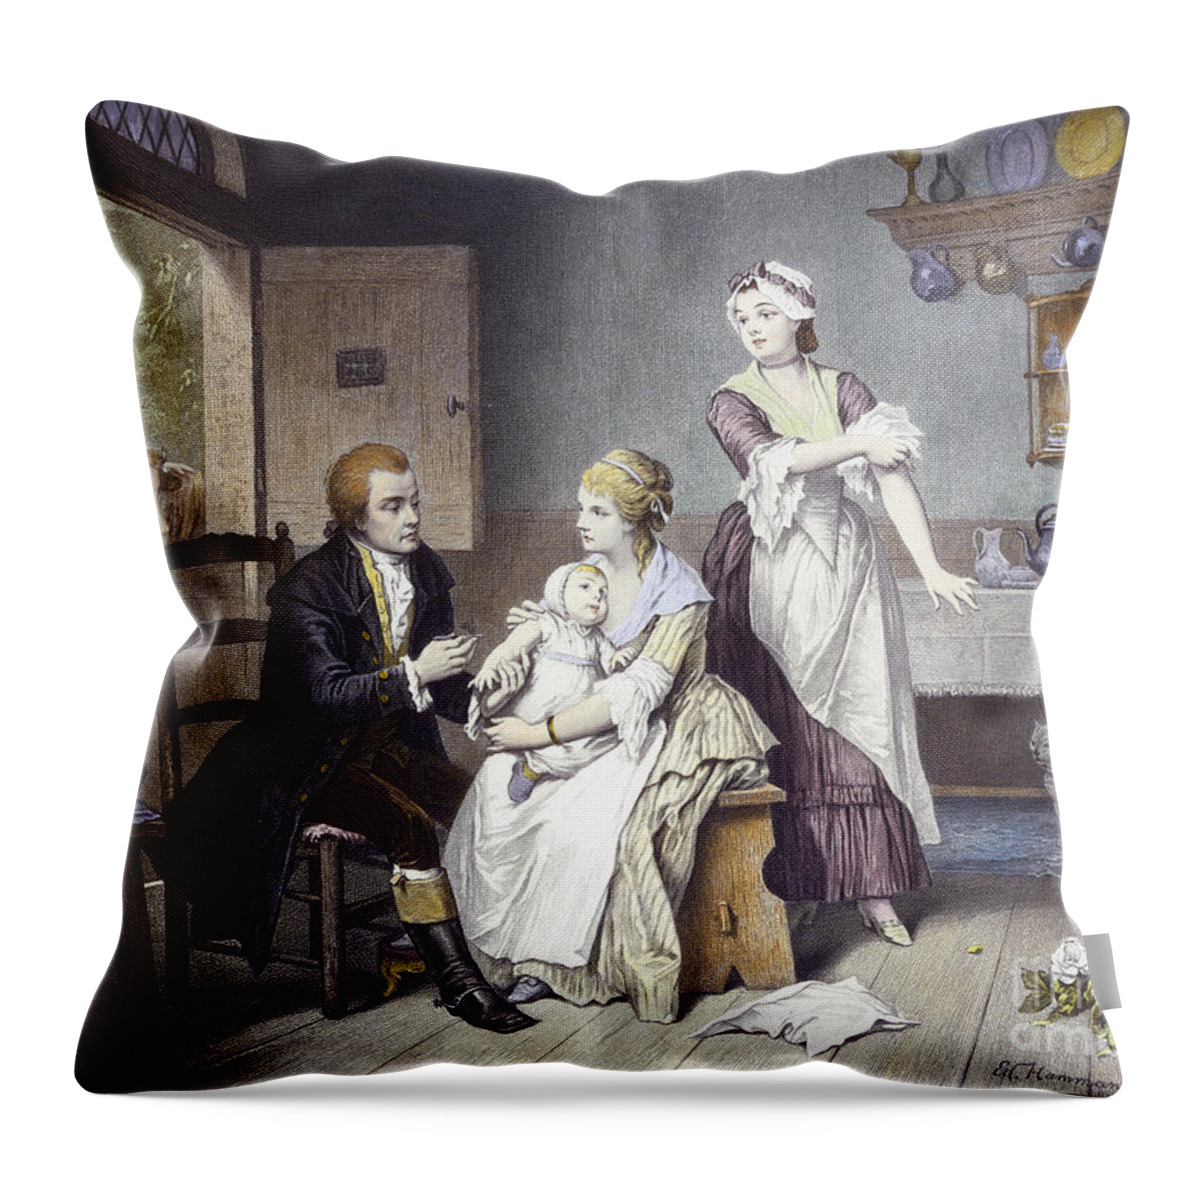 History Throw Pillow featuring the photograph Edward Jenner Vaccinating Child, 1796 by Wellcome Images